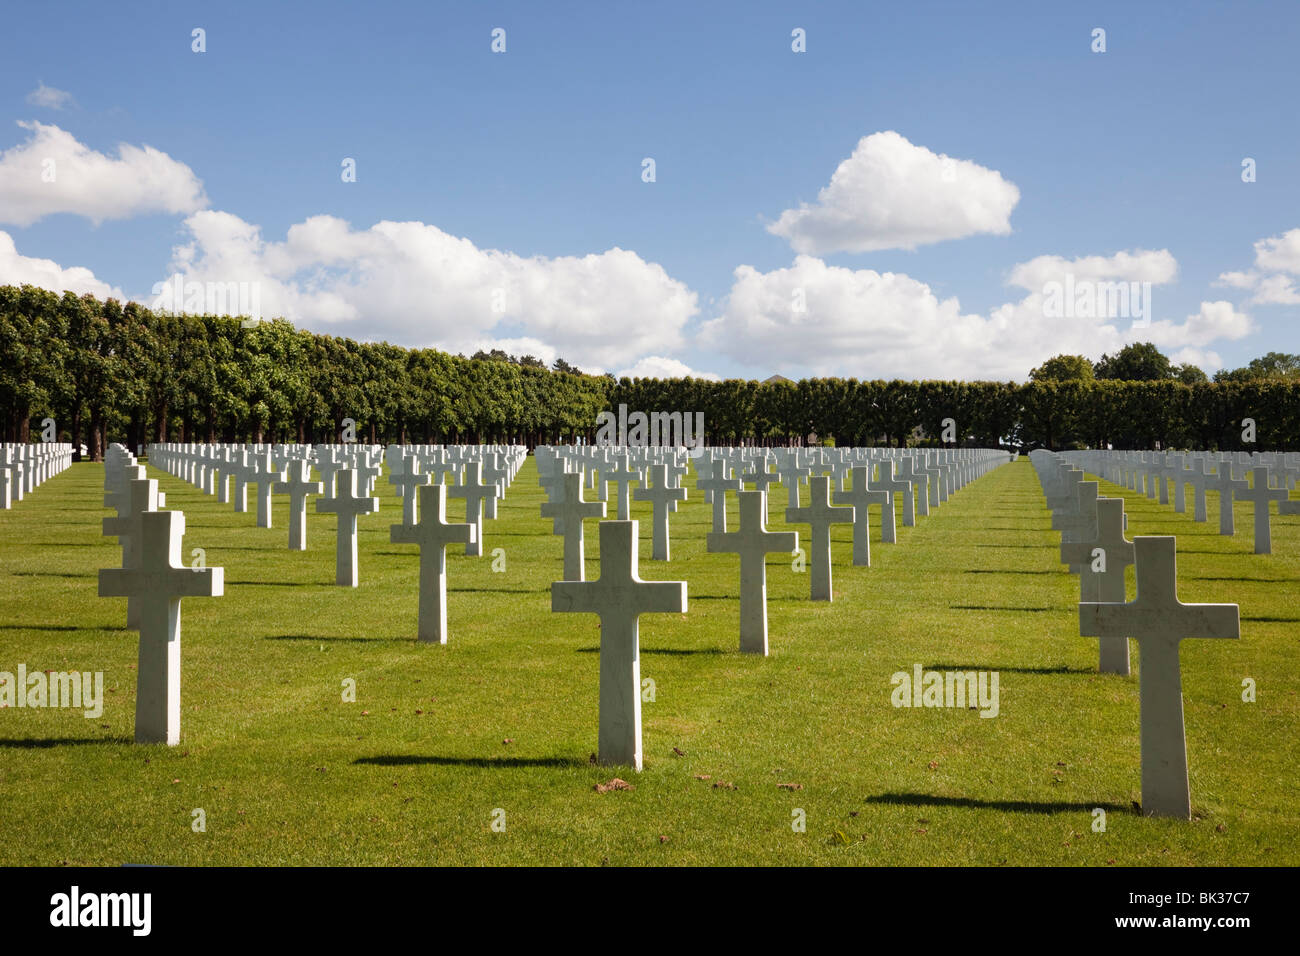 Rows of white marble headstones in the Meuse-Argonne American Military cemetery, Meuse, France Stock Photo